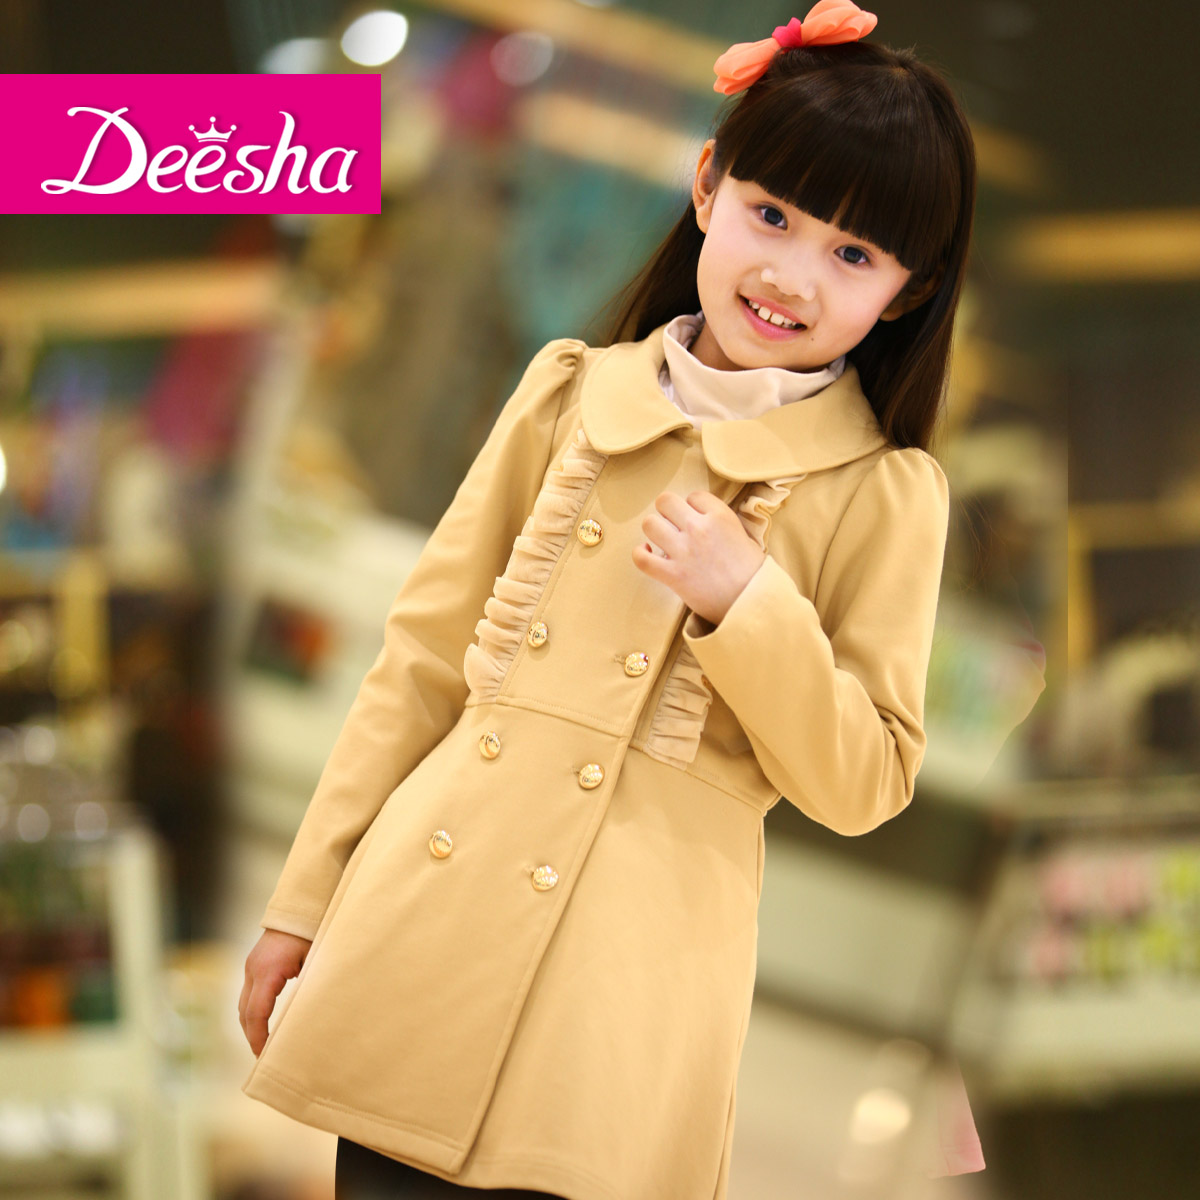 DEESHA 2012 spring and autumn girls clothing princess baby medium-long small child trench outerwear